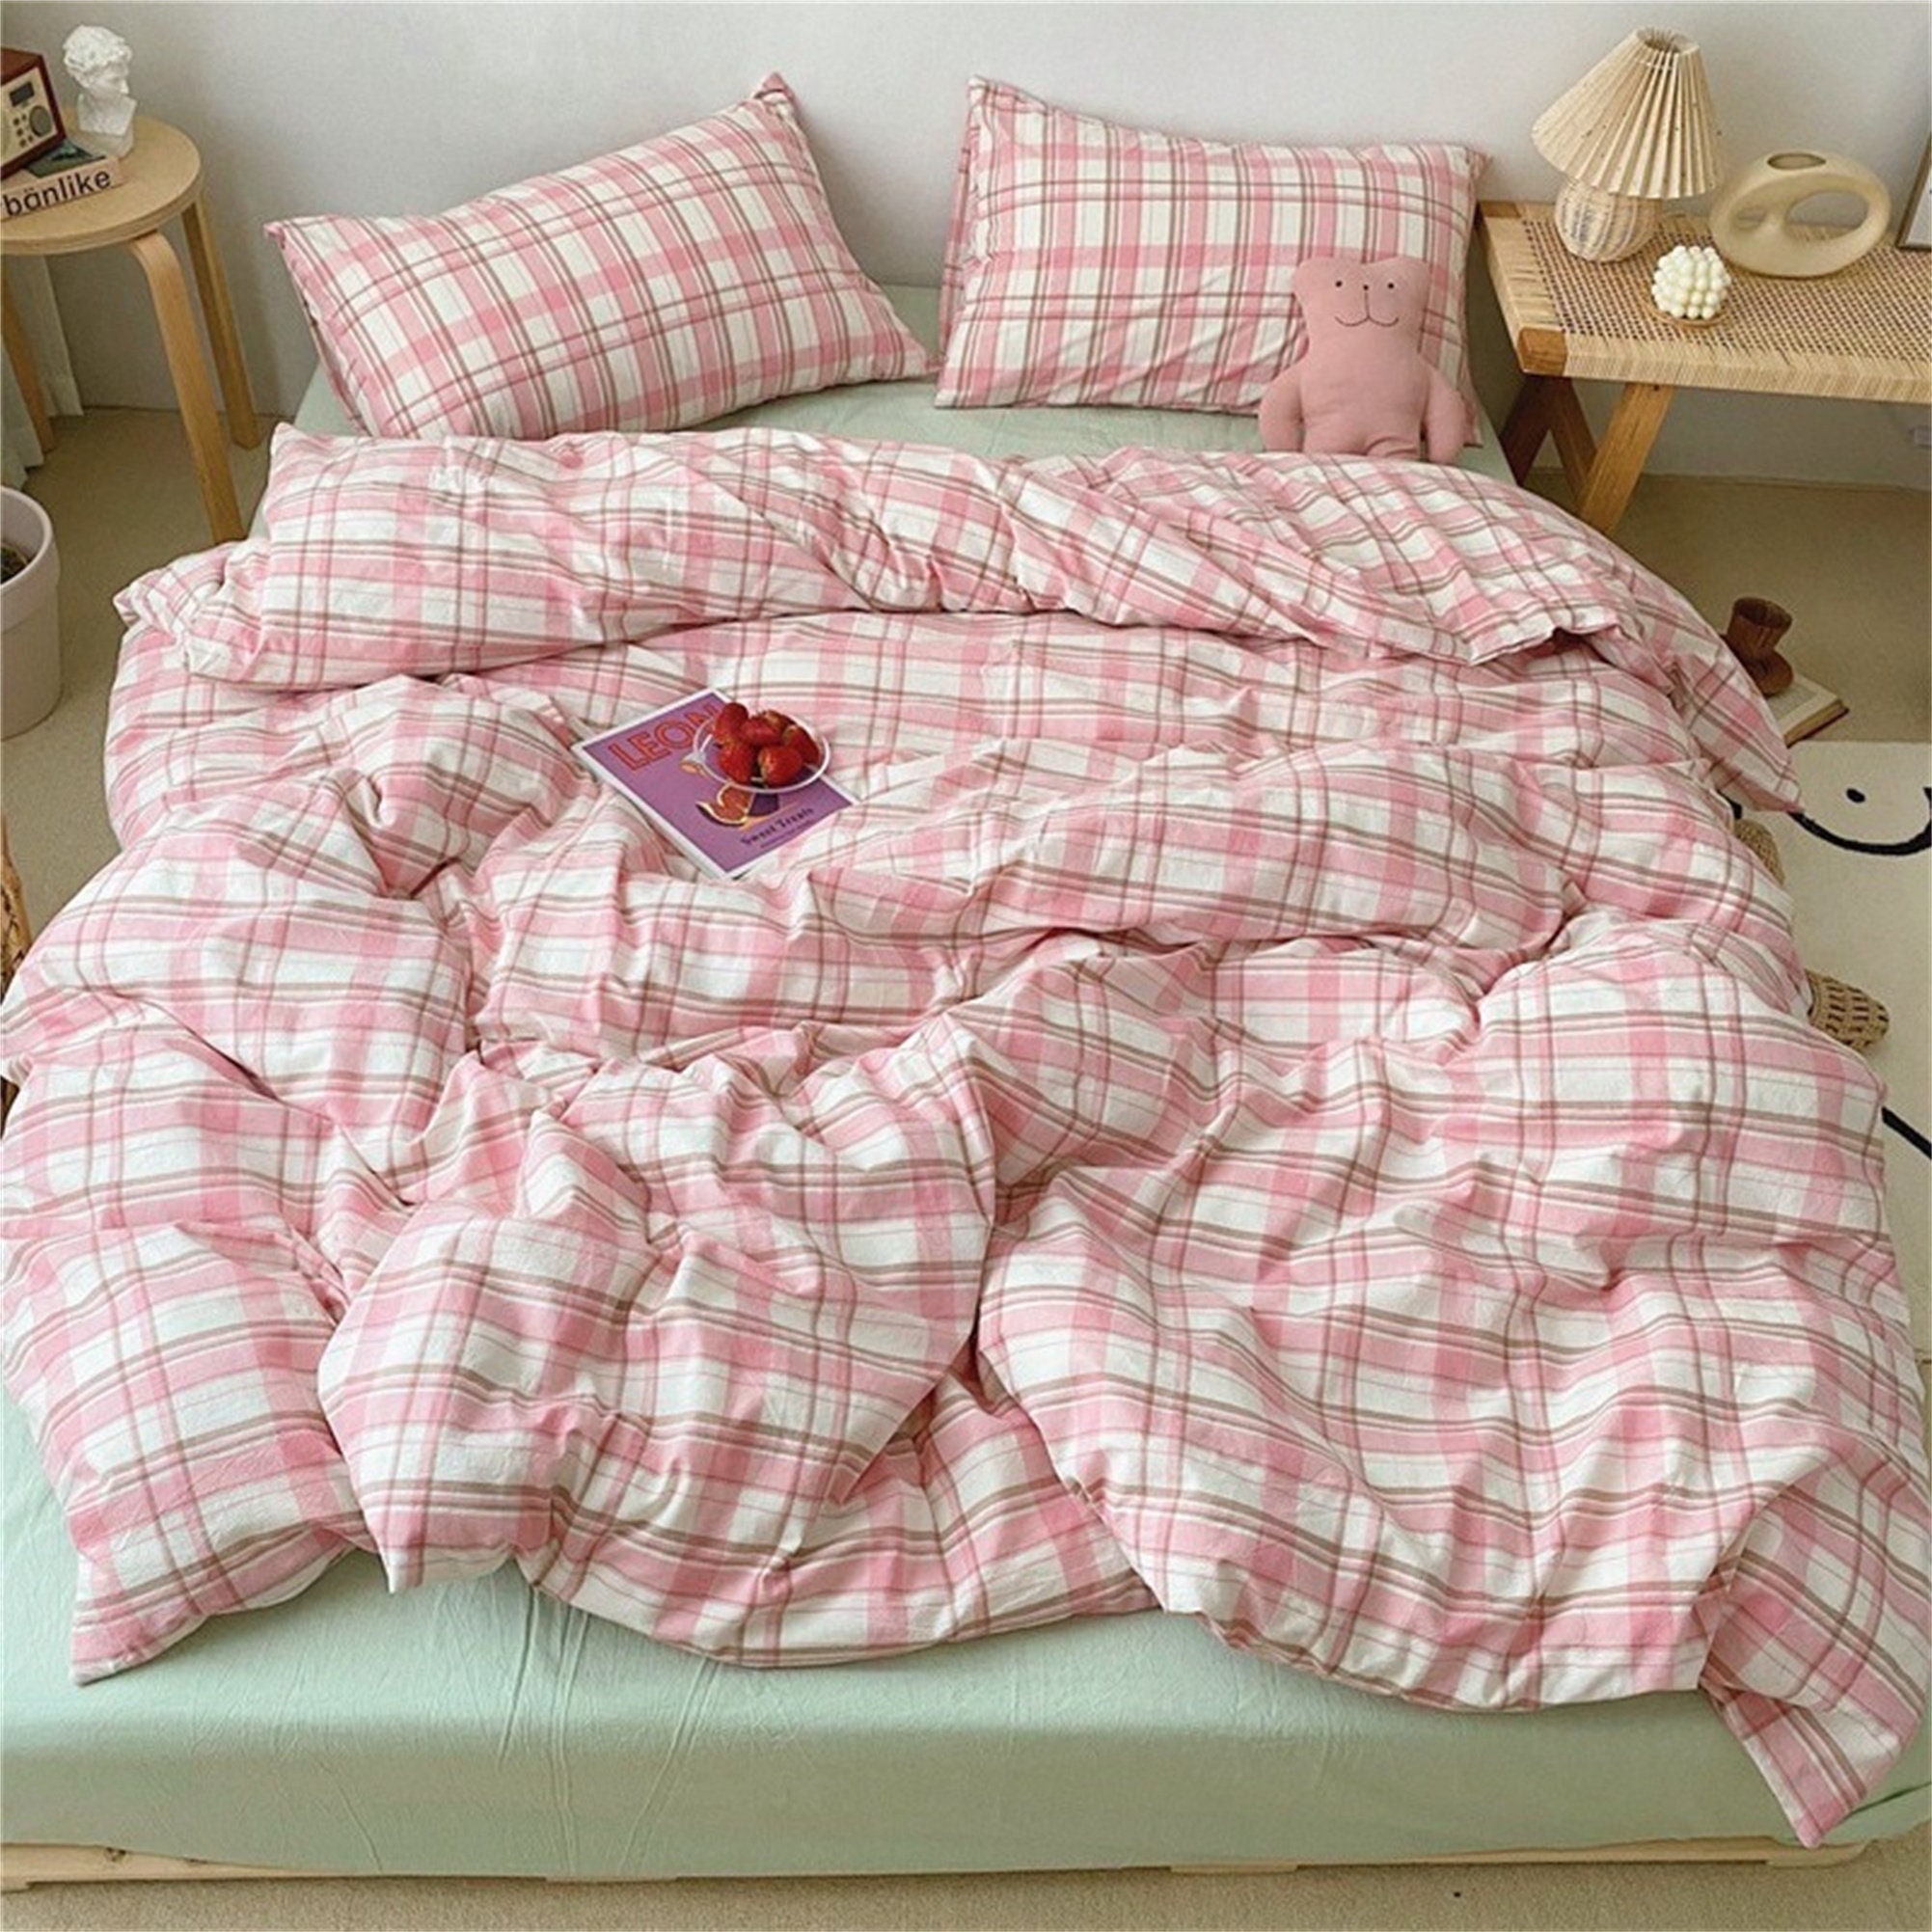 New Pink Gingham Full Size Comforter Set Bed in a Bag Pink Sheets Girl's Bedding 